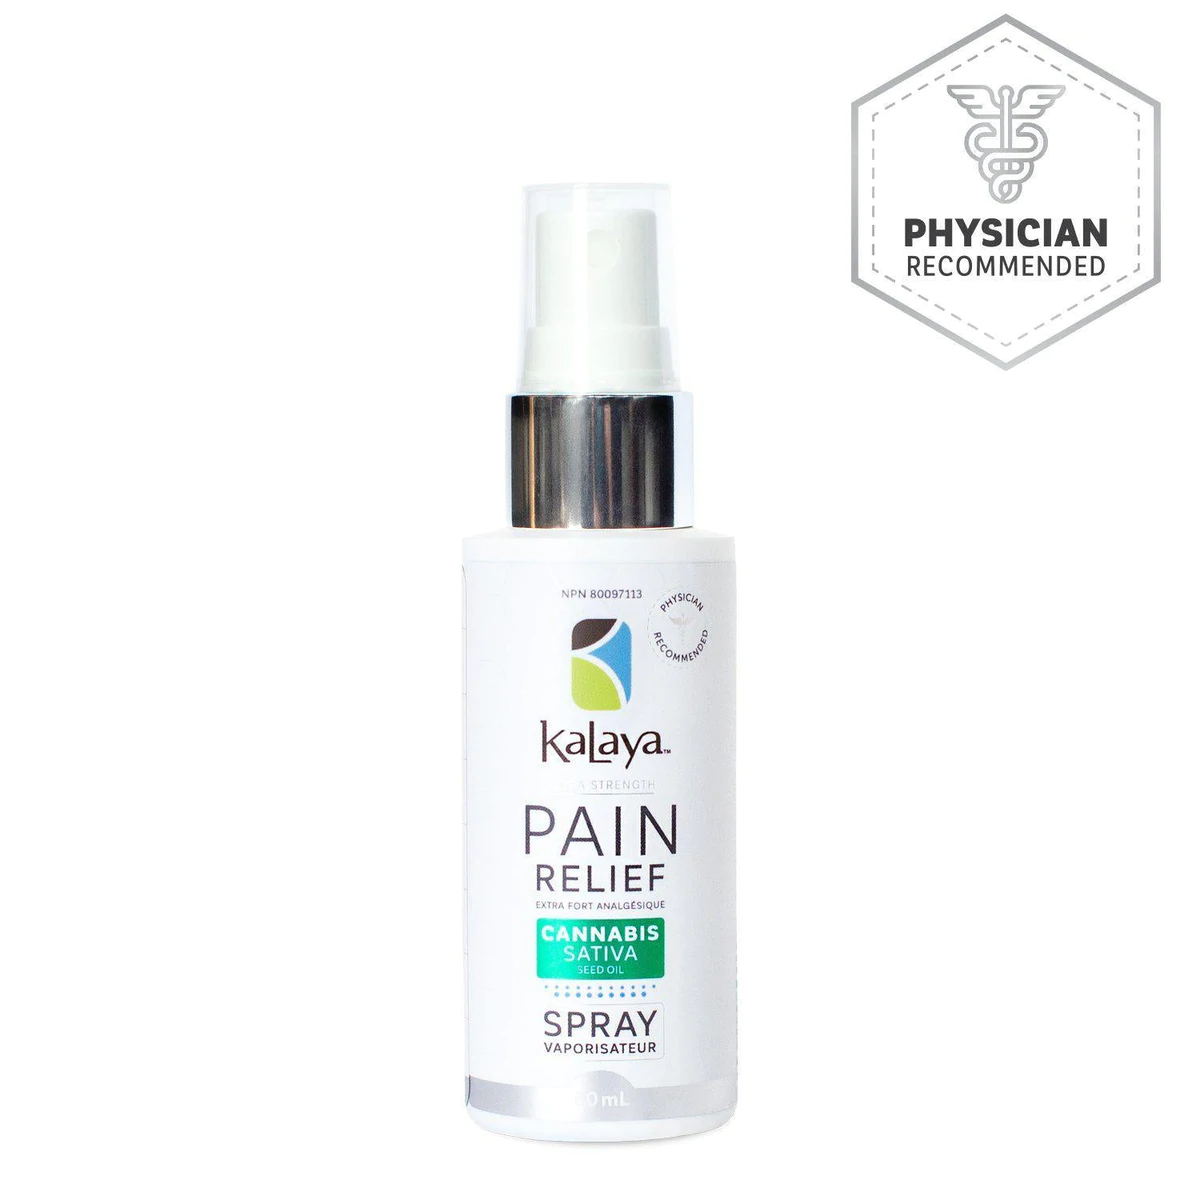 kalaya-pain-relief-spray-with-cannabis-sativa-seed-oil-vaporisateur-60mL-bottle-physician-recommended_1200x1200